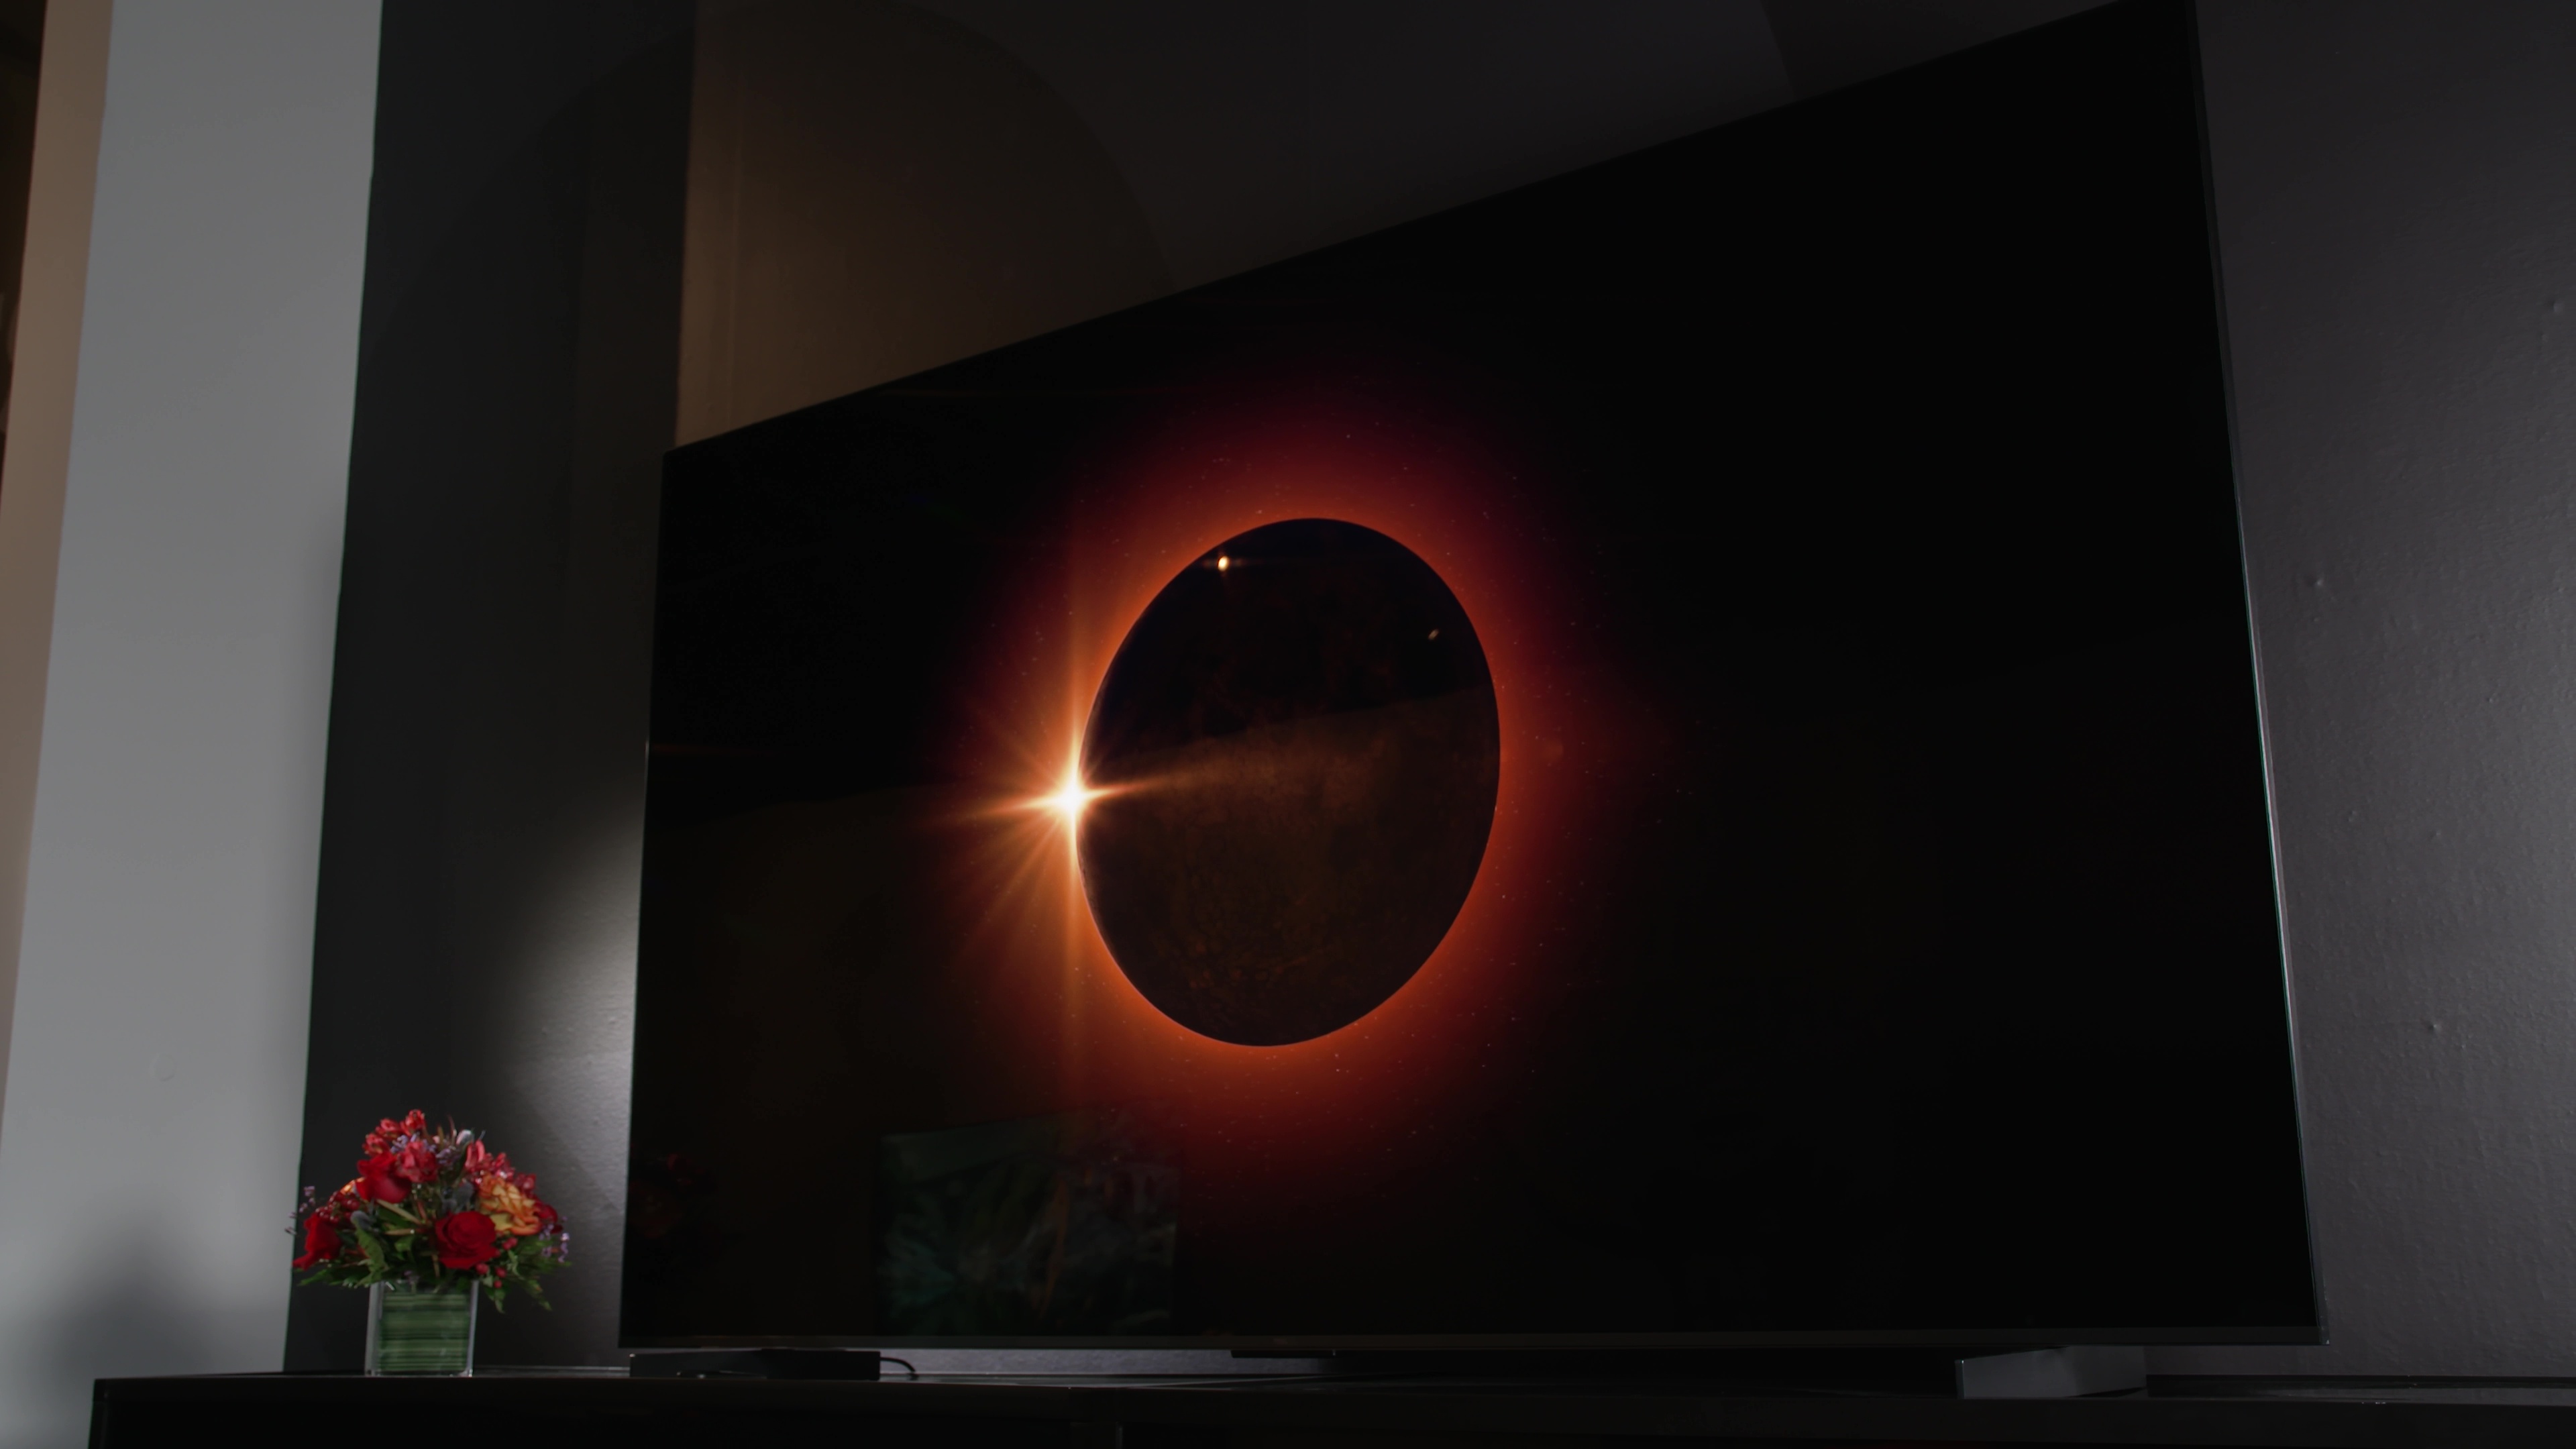 An image of an eclipse on a TCL QM8 Mini-LED TV.